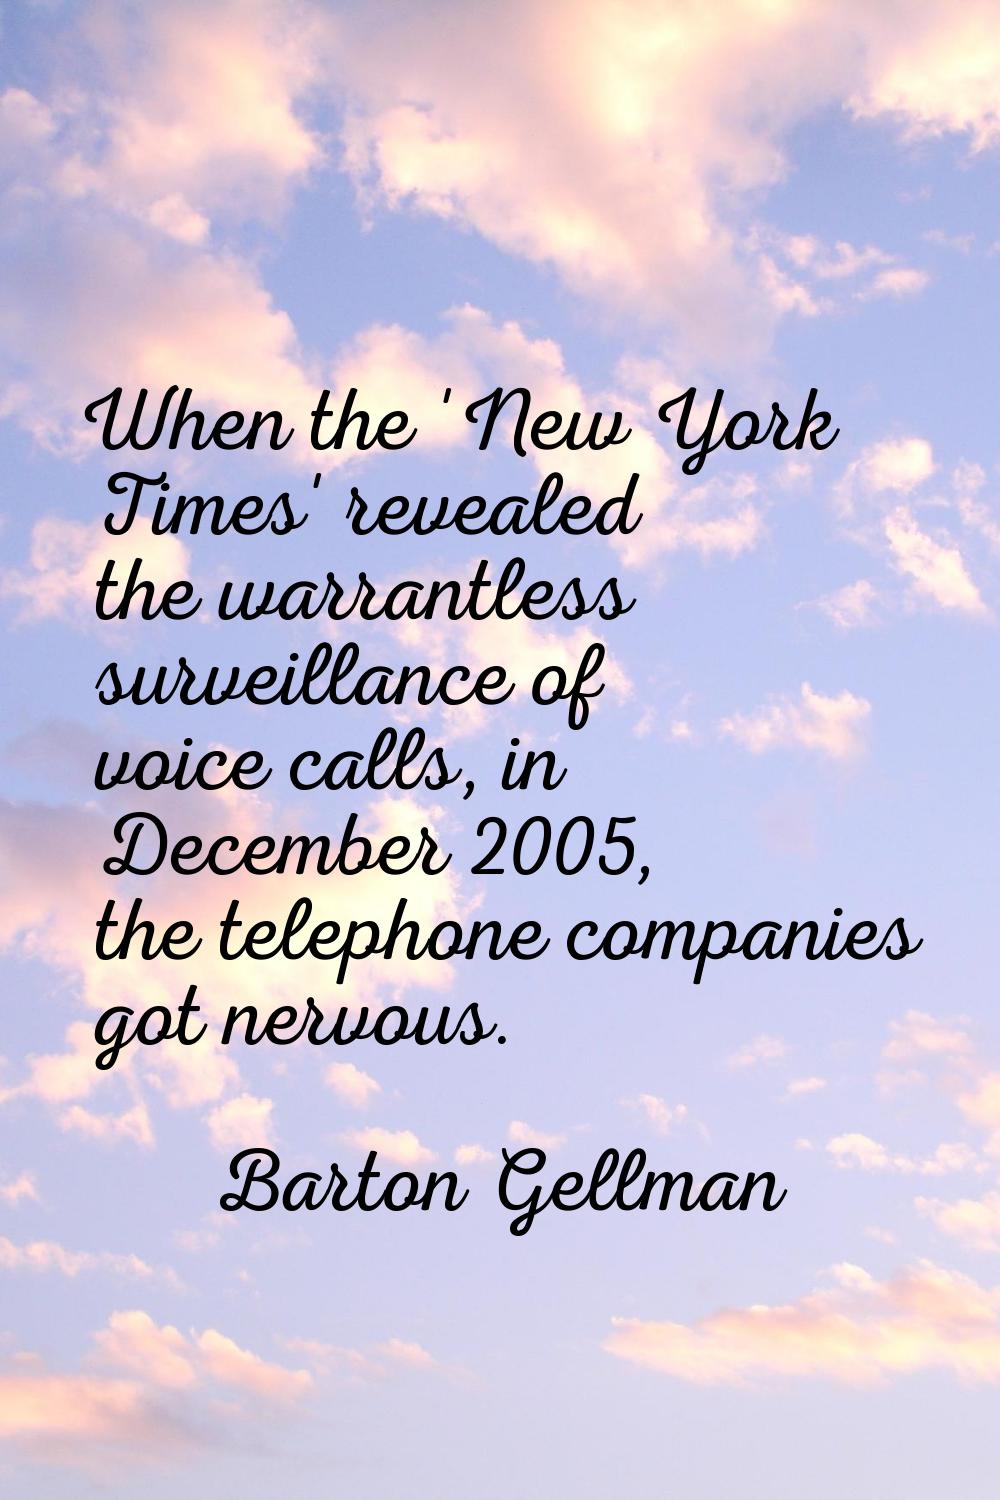 When the 'New York Times' revealed the warrantless surveillance of voice calls, in December 2005, t